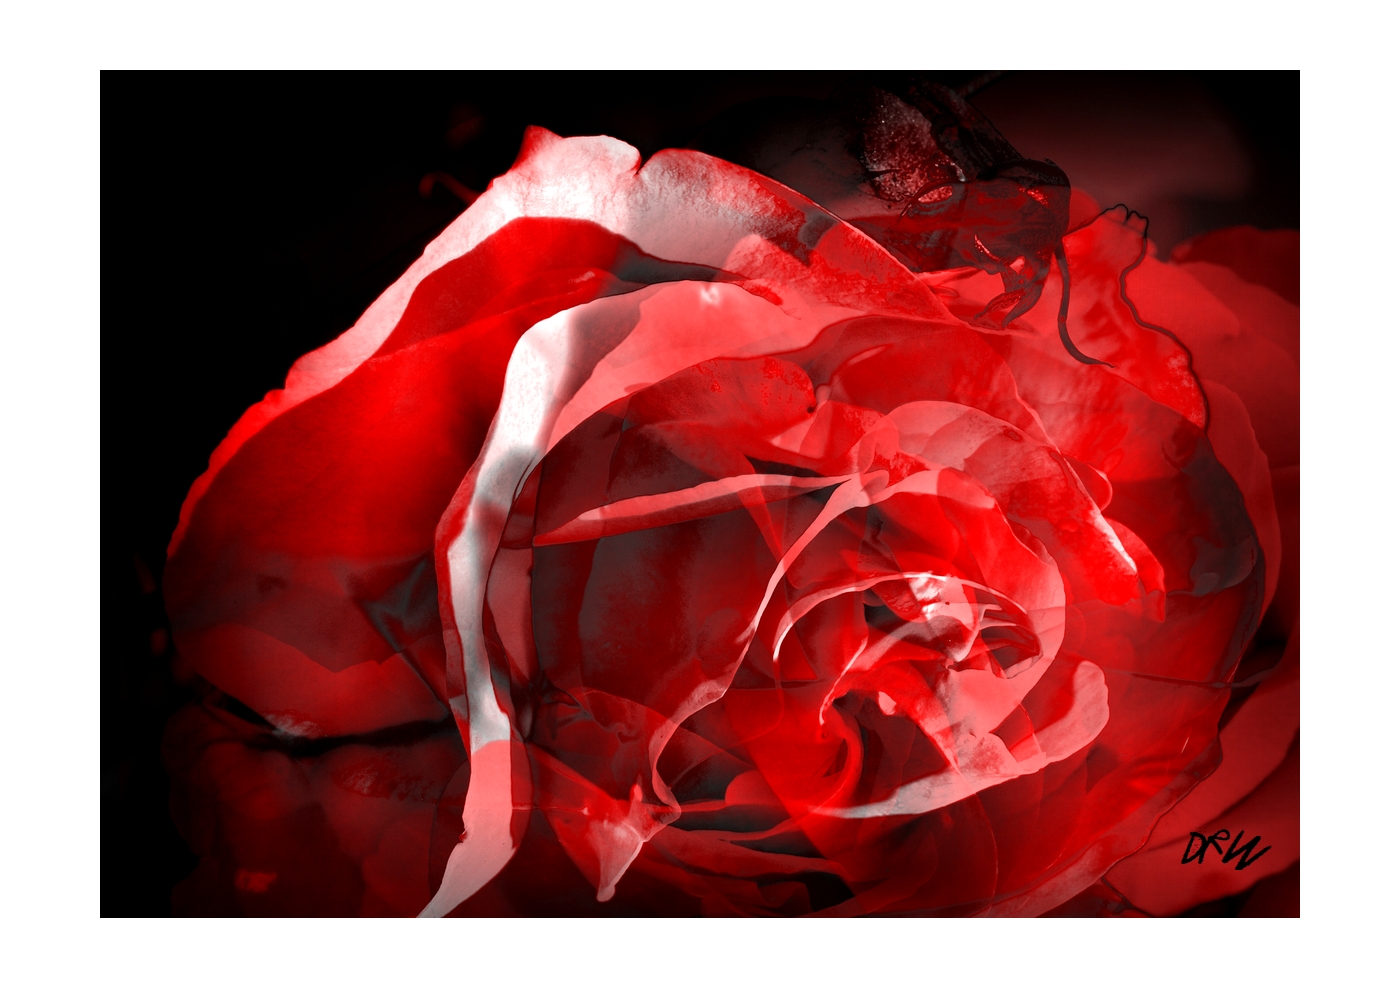 ArtAperture.net - Dar Wolfe - Storm - Floral - Showcase of floral beauty achieved through a selective fusion of reality and art